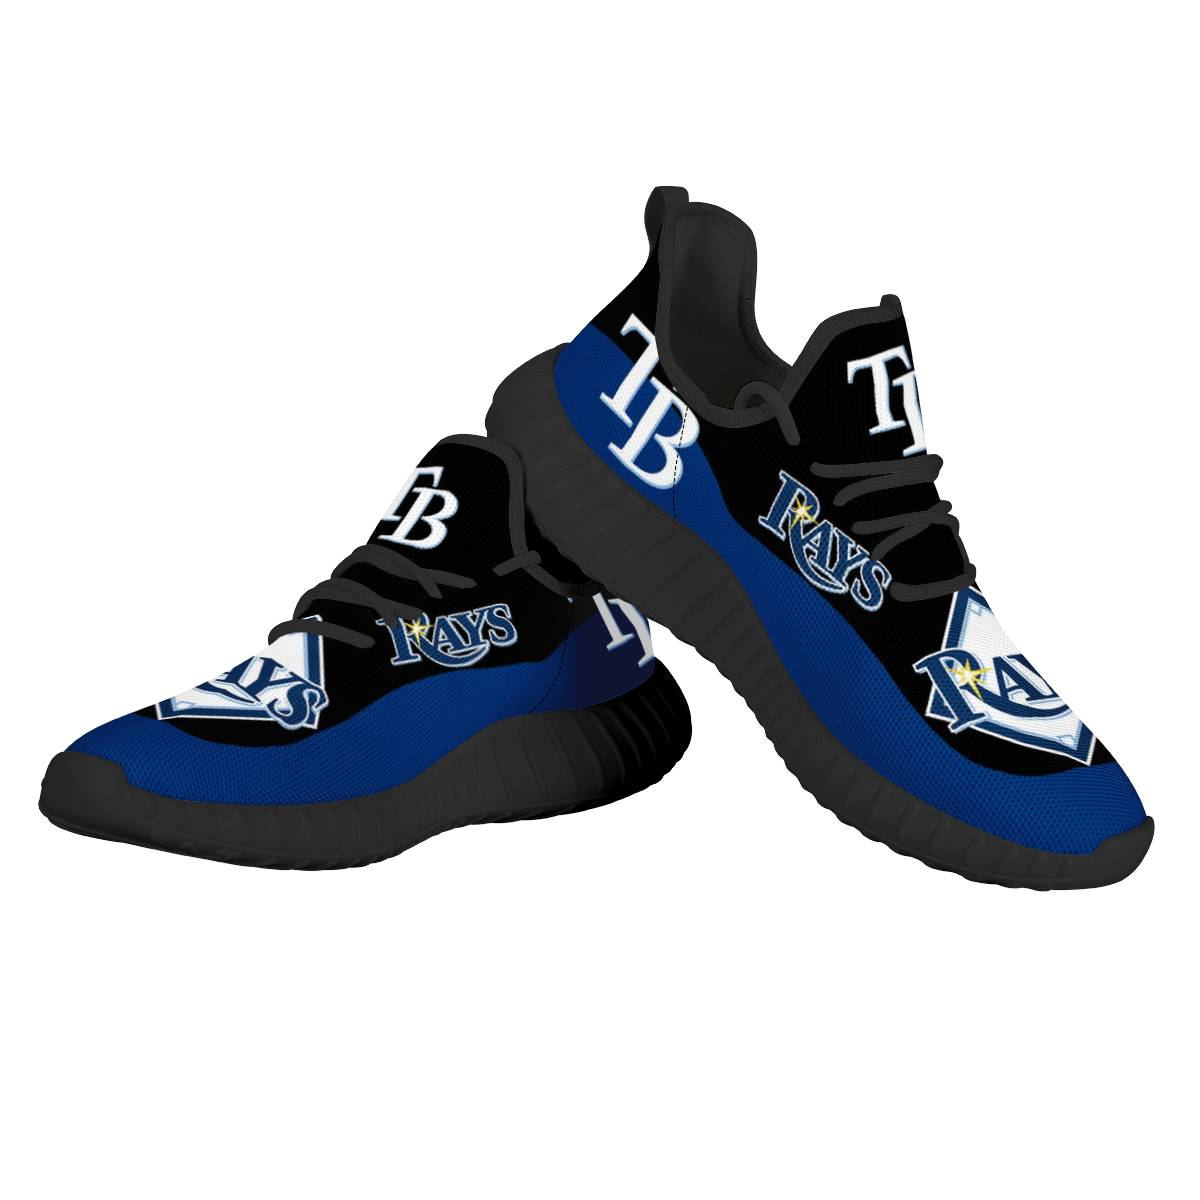 Women's MLB Tampa Bay Rays Mesh Knit Sneakers/Shoes 001